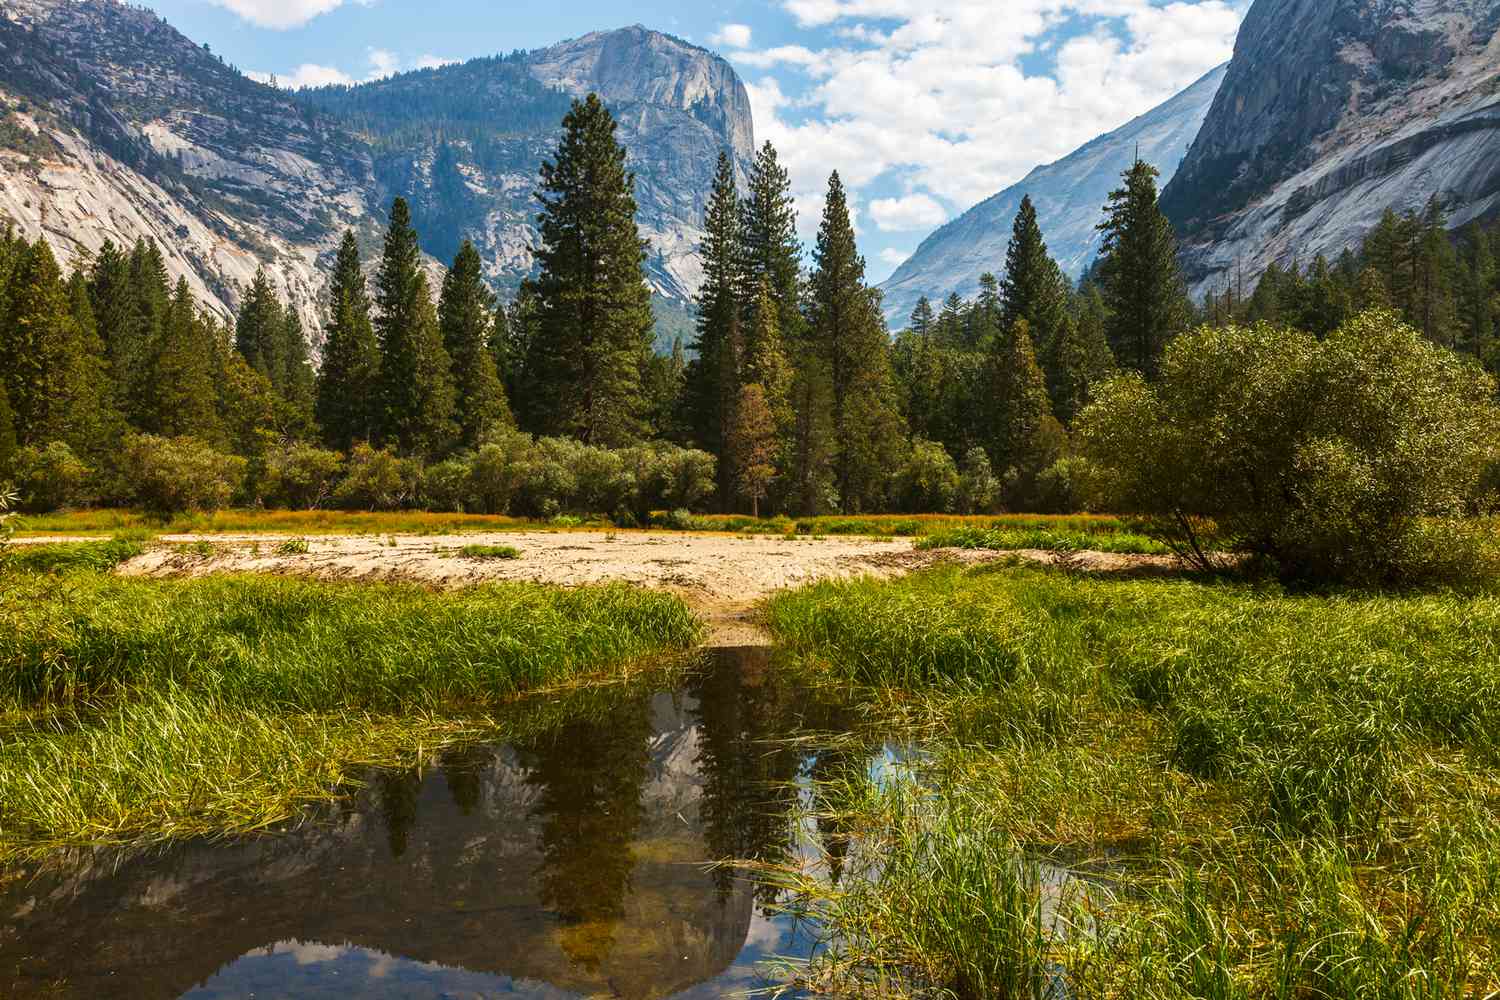 Popular National Parks End Seasonal Reservations - Except For A Few Spots